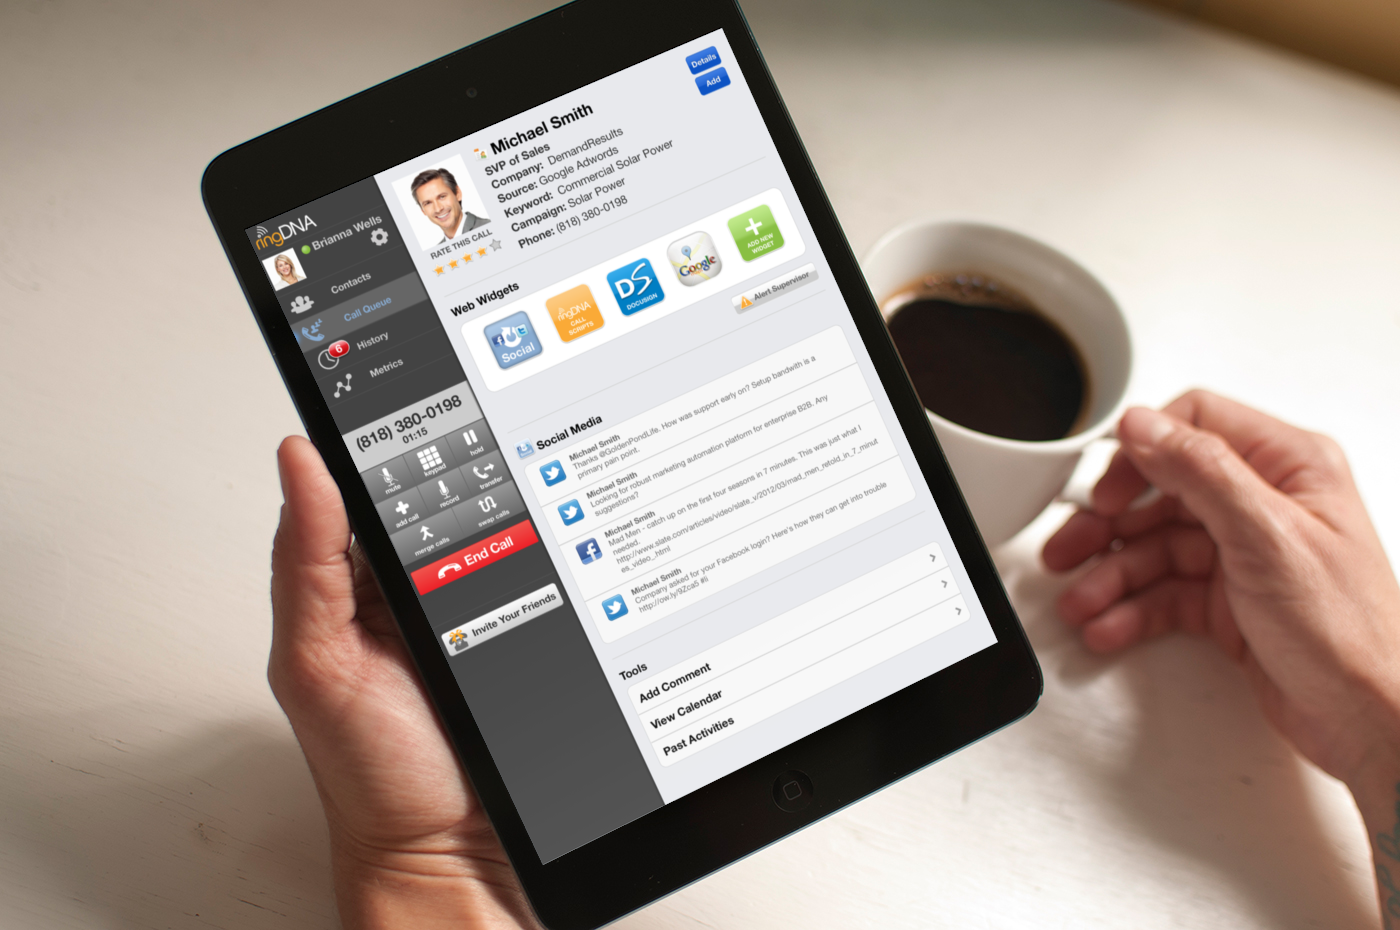 Integrating iPad CRM apps with other business tools and software